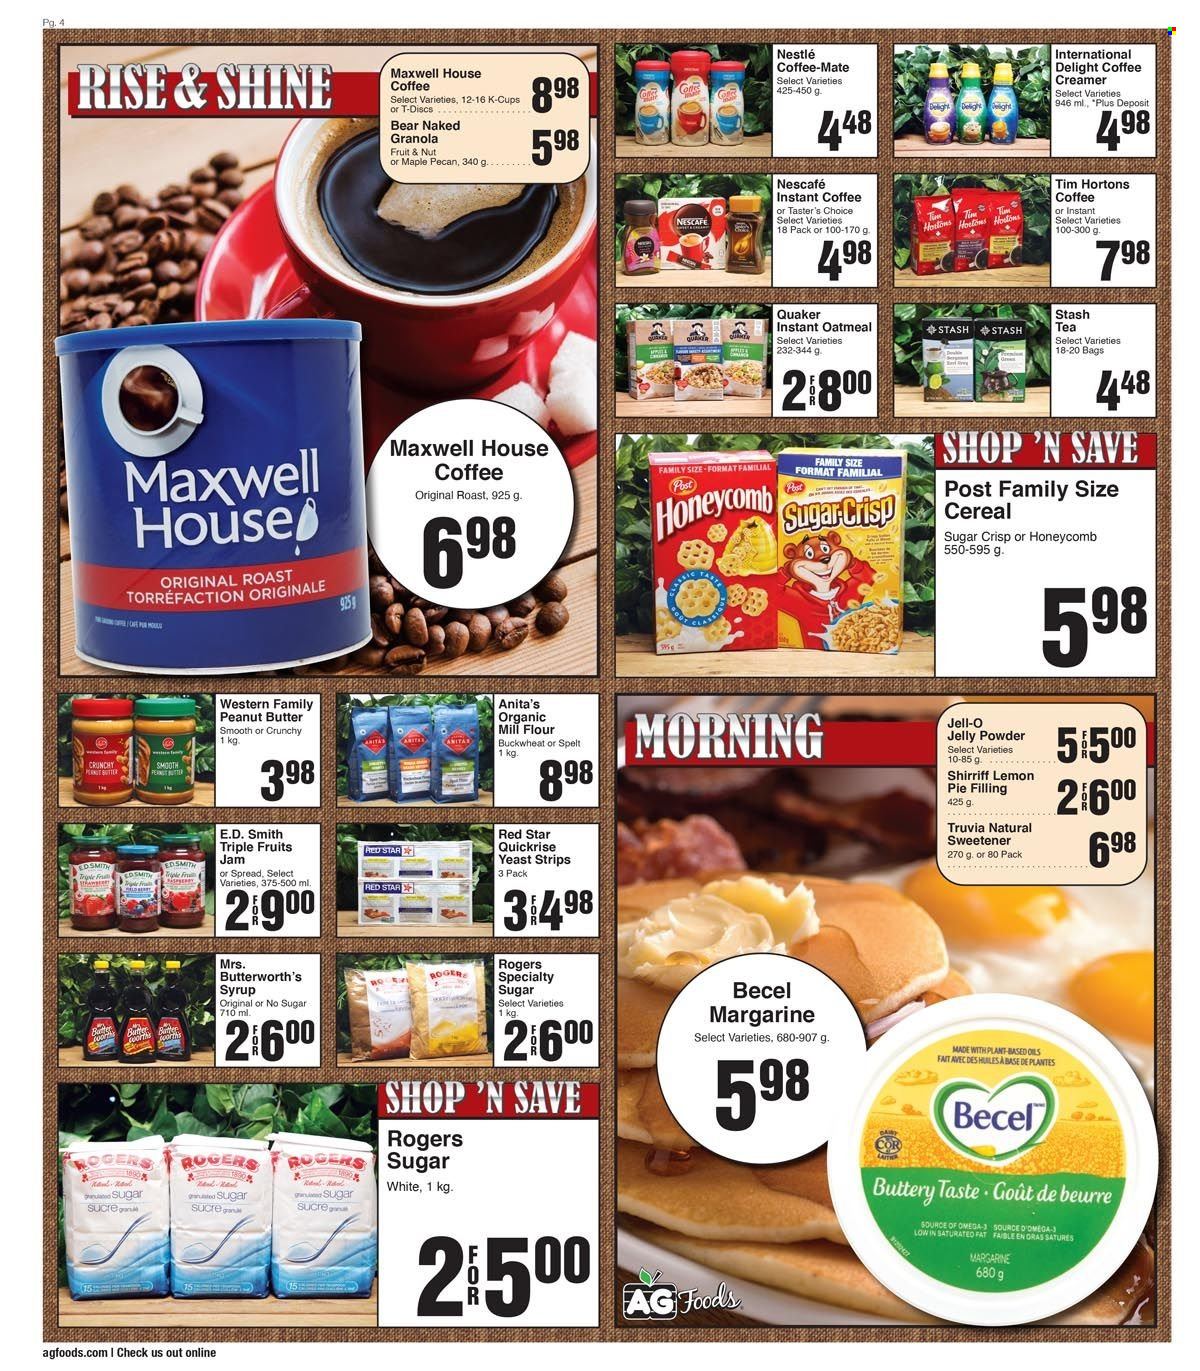 thumbnail - AG Foods Flyer - May 15, 2022 - May 21, 2022 - Sales products - Quaker, Coffee-Mate, yeast, margarine, creamer, strips, jelly, flour, pie filling, oatmeal, Jell-O, sweetener, cereals, buckwheat, fruit jam, peanut butter, syrup, Maxwell House, tea, instant coffee, coffee capsules, K-Cups, granola, Nestlé, Nescafé. Page 4.